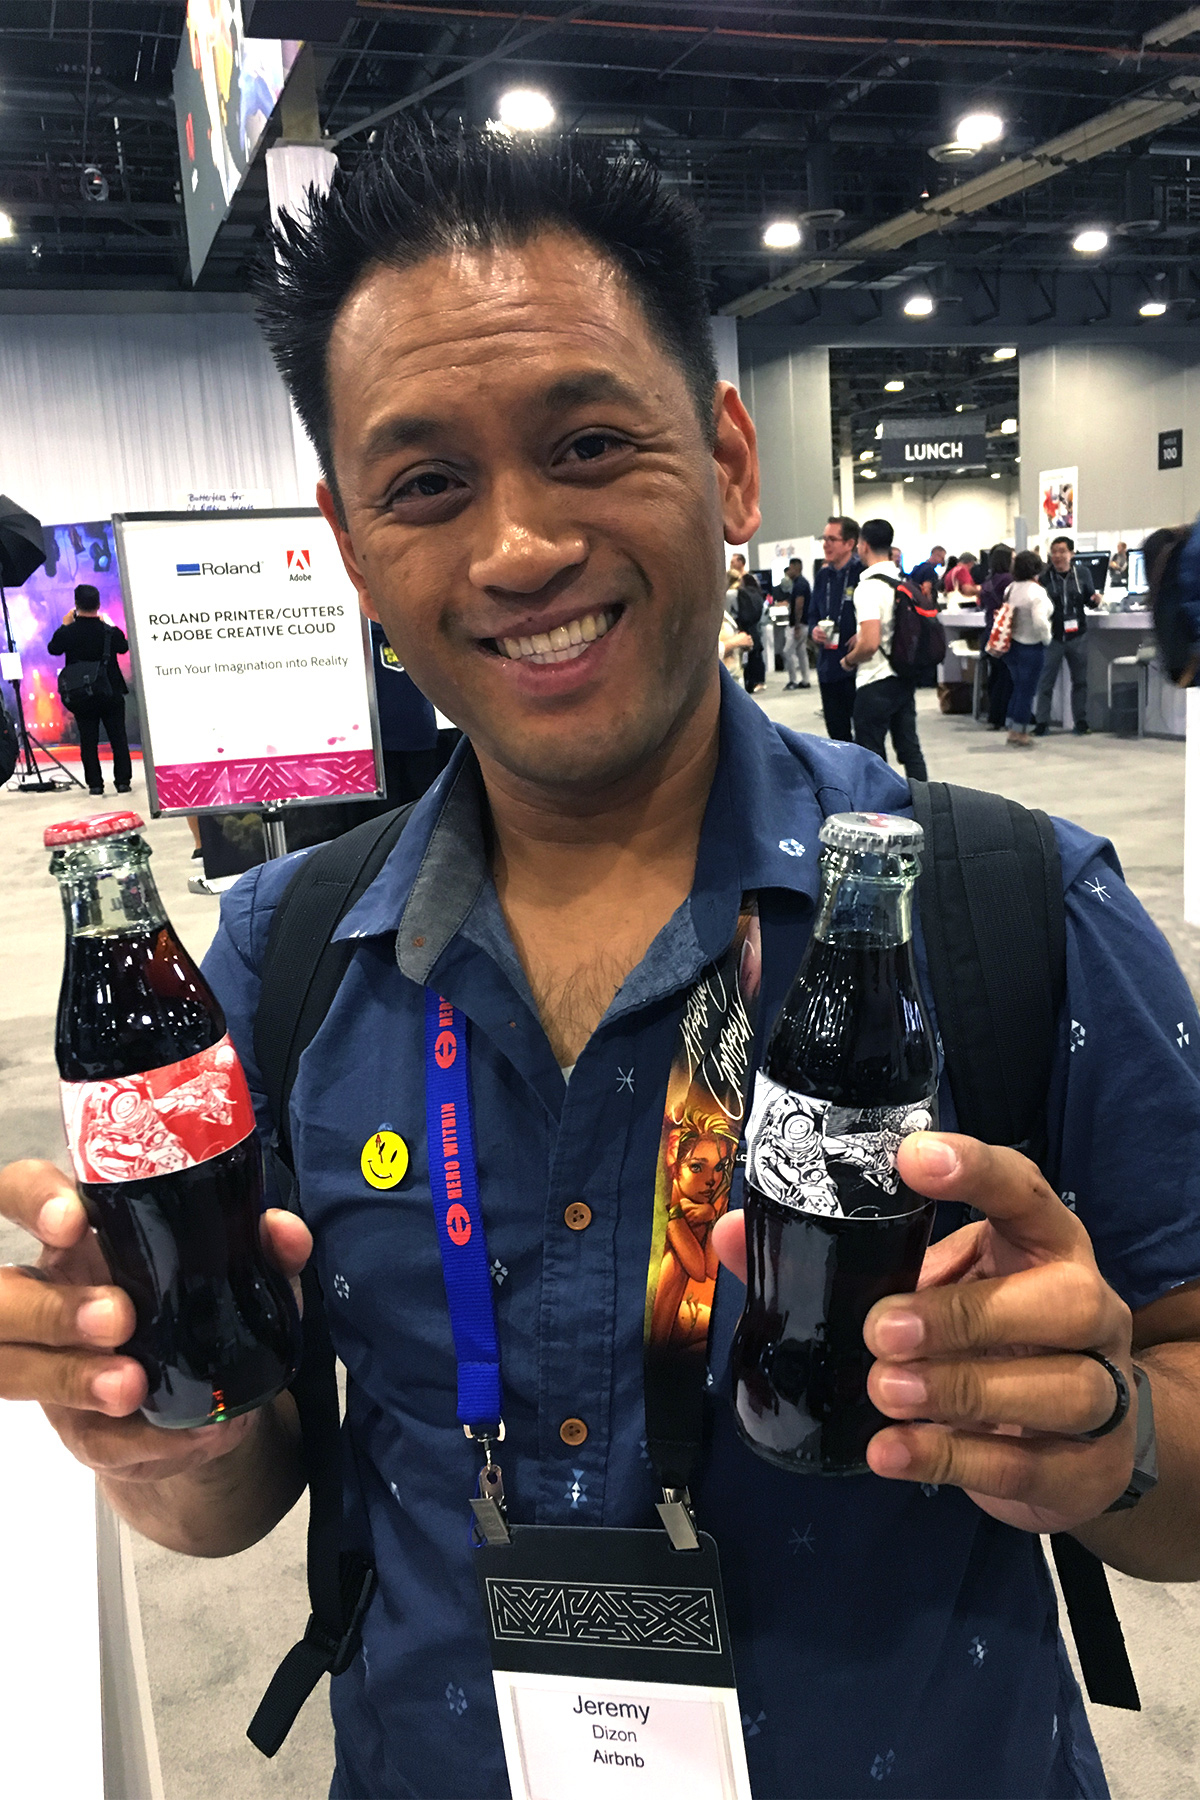 Adobe MAX conference attendee Jeremy Dixon shows off his customized Coke labels printed on a Roland VG series printer cutter